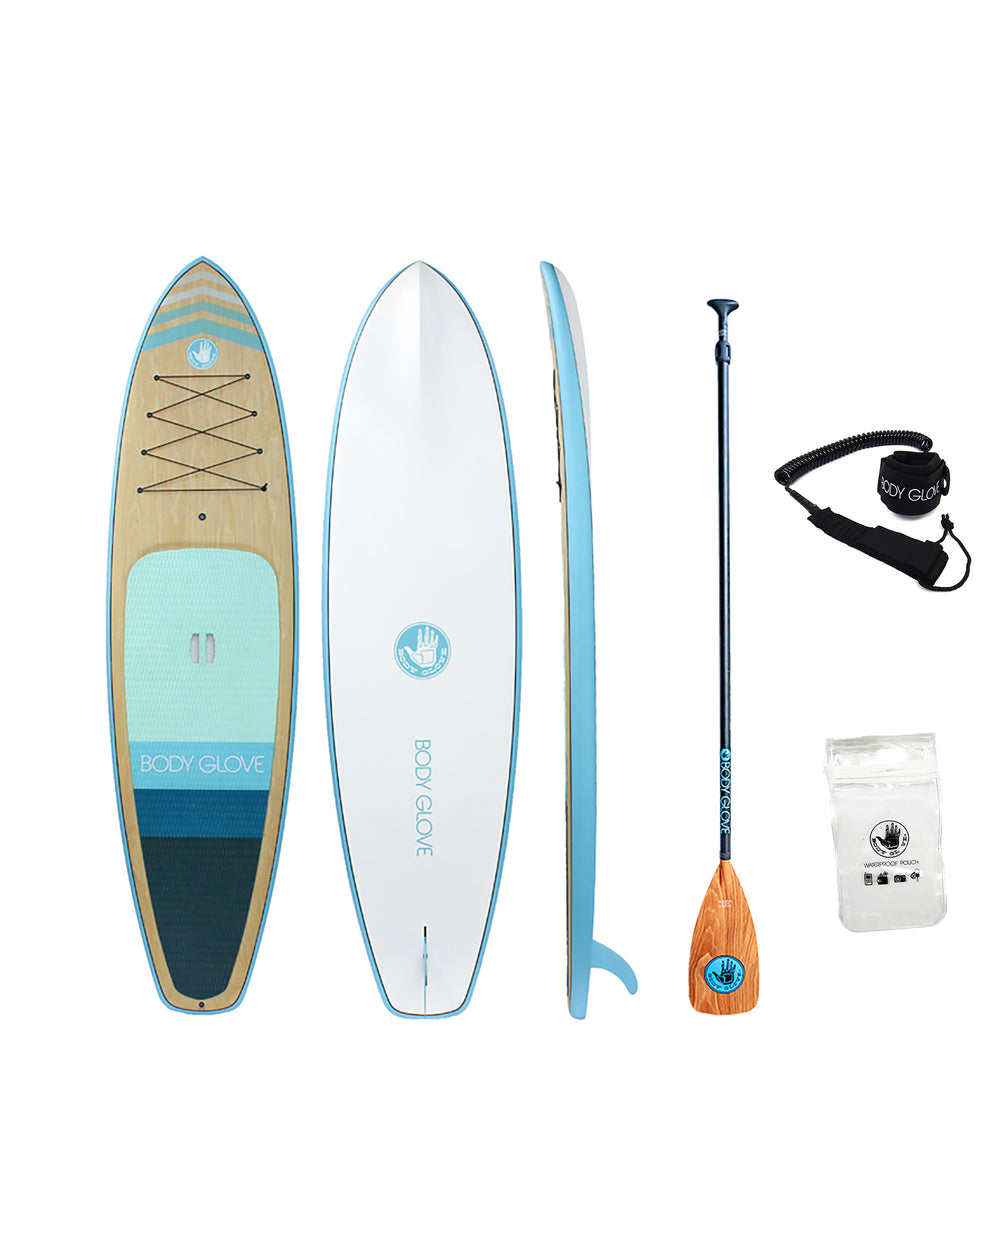 pcsuplegnd20u-242___legend-106-inflatable-stand-up-paddle-board-isup-with-accessories-wood-teal___set_1000x.jpeg